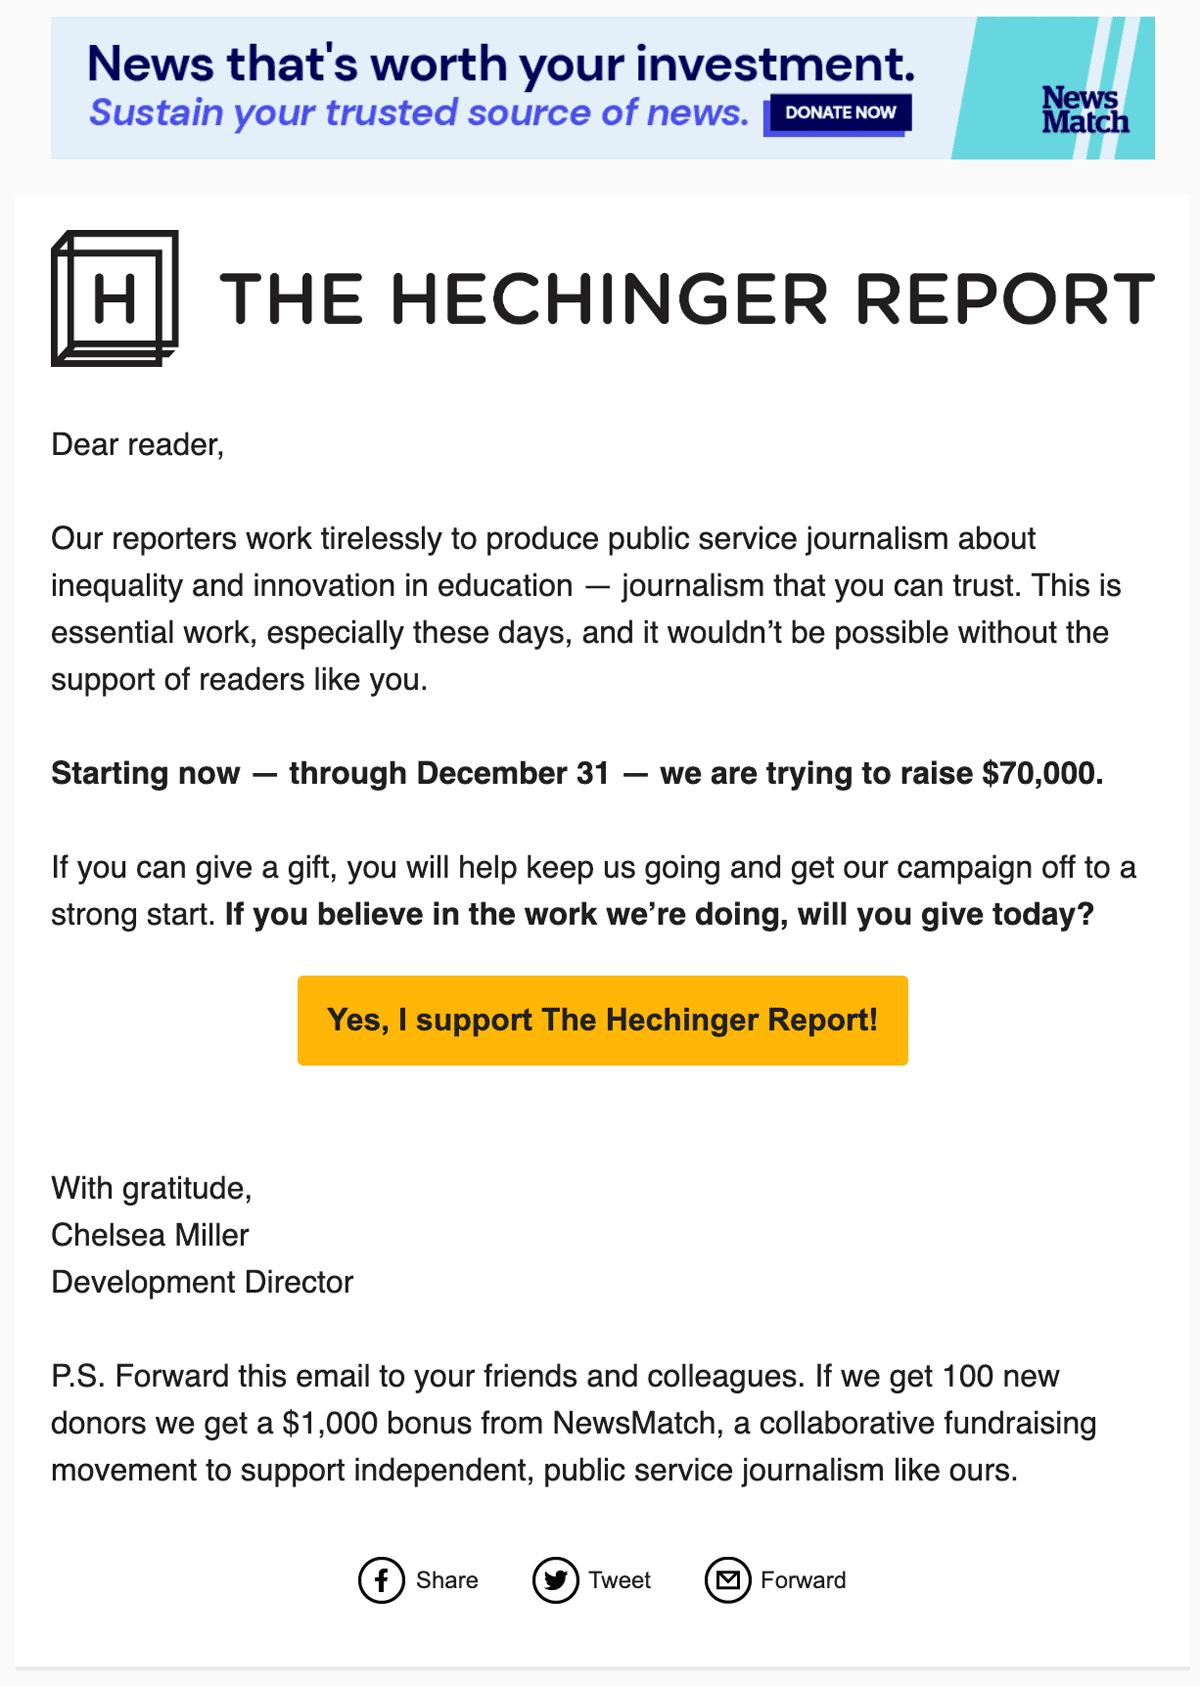 Hechinger Report NewsMatch Kick Off Email for 2022